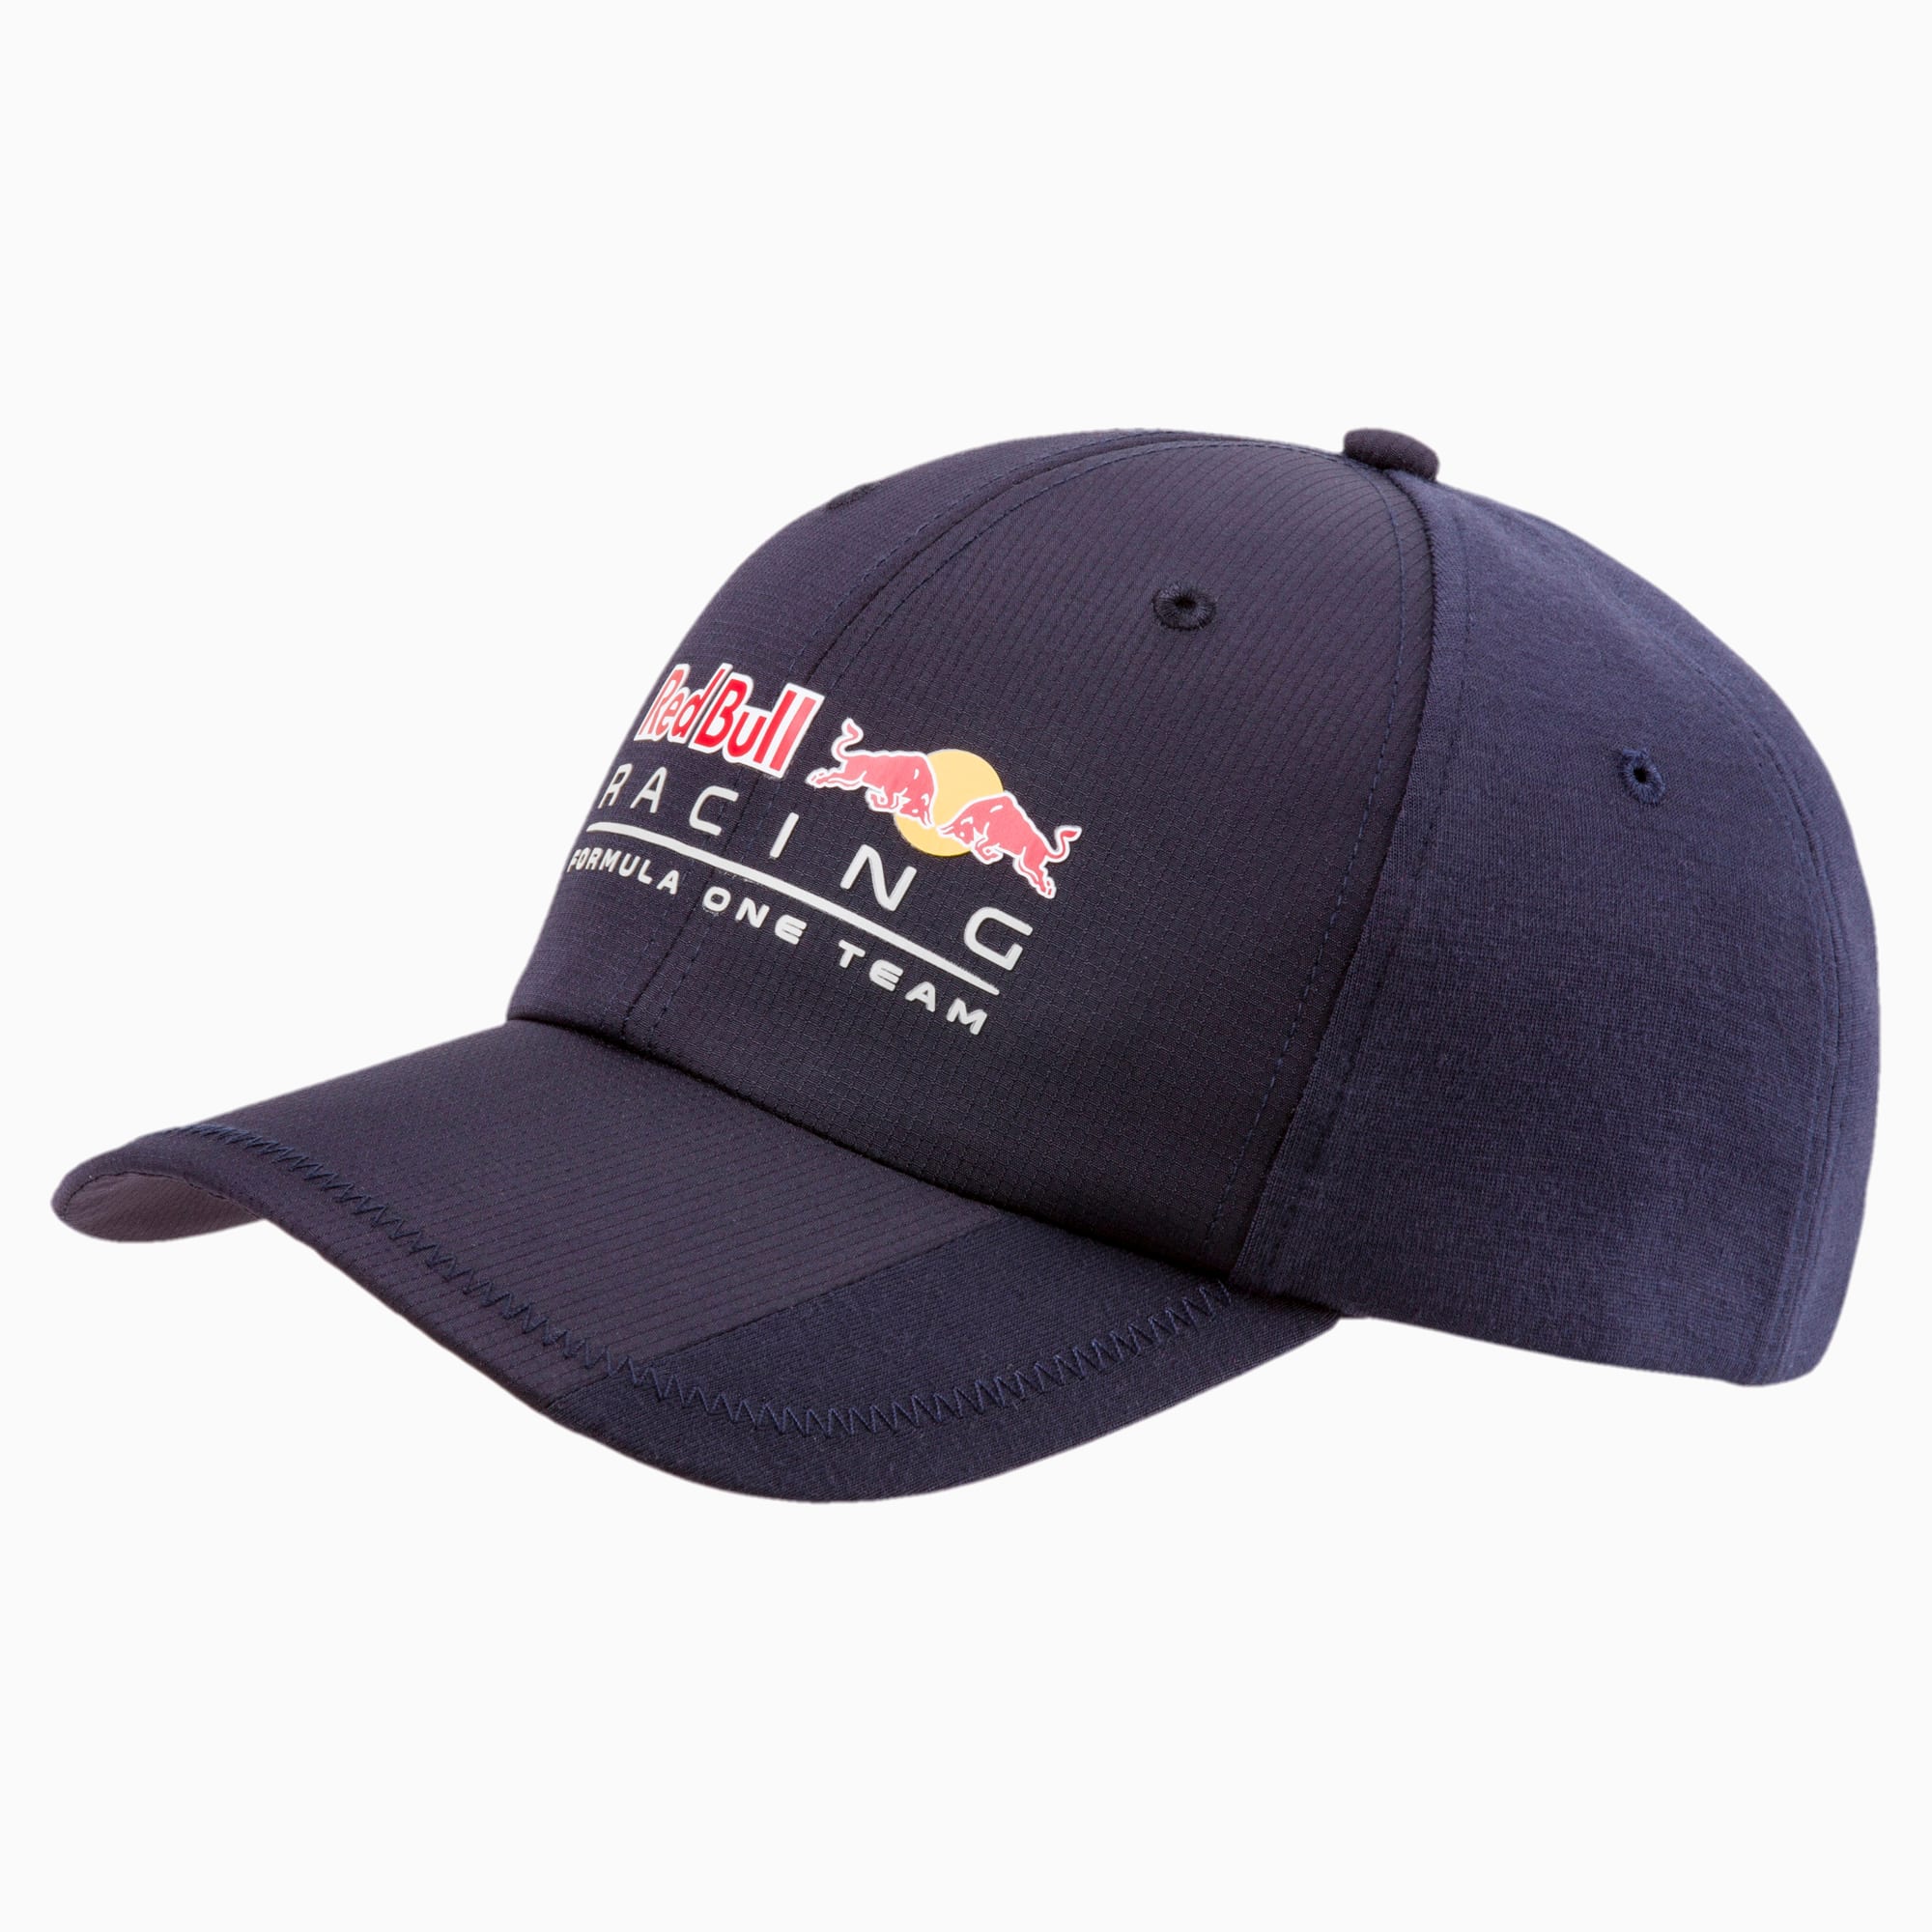 GREEN STORE - Puma - Casquette Red Bull Racing Lifestyle